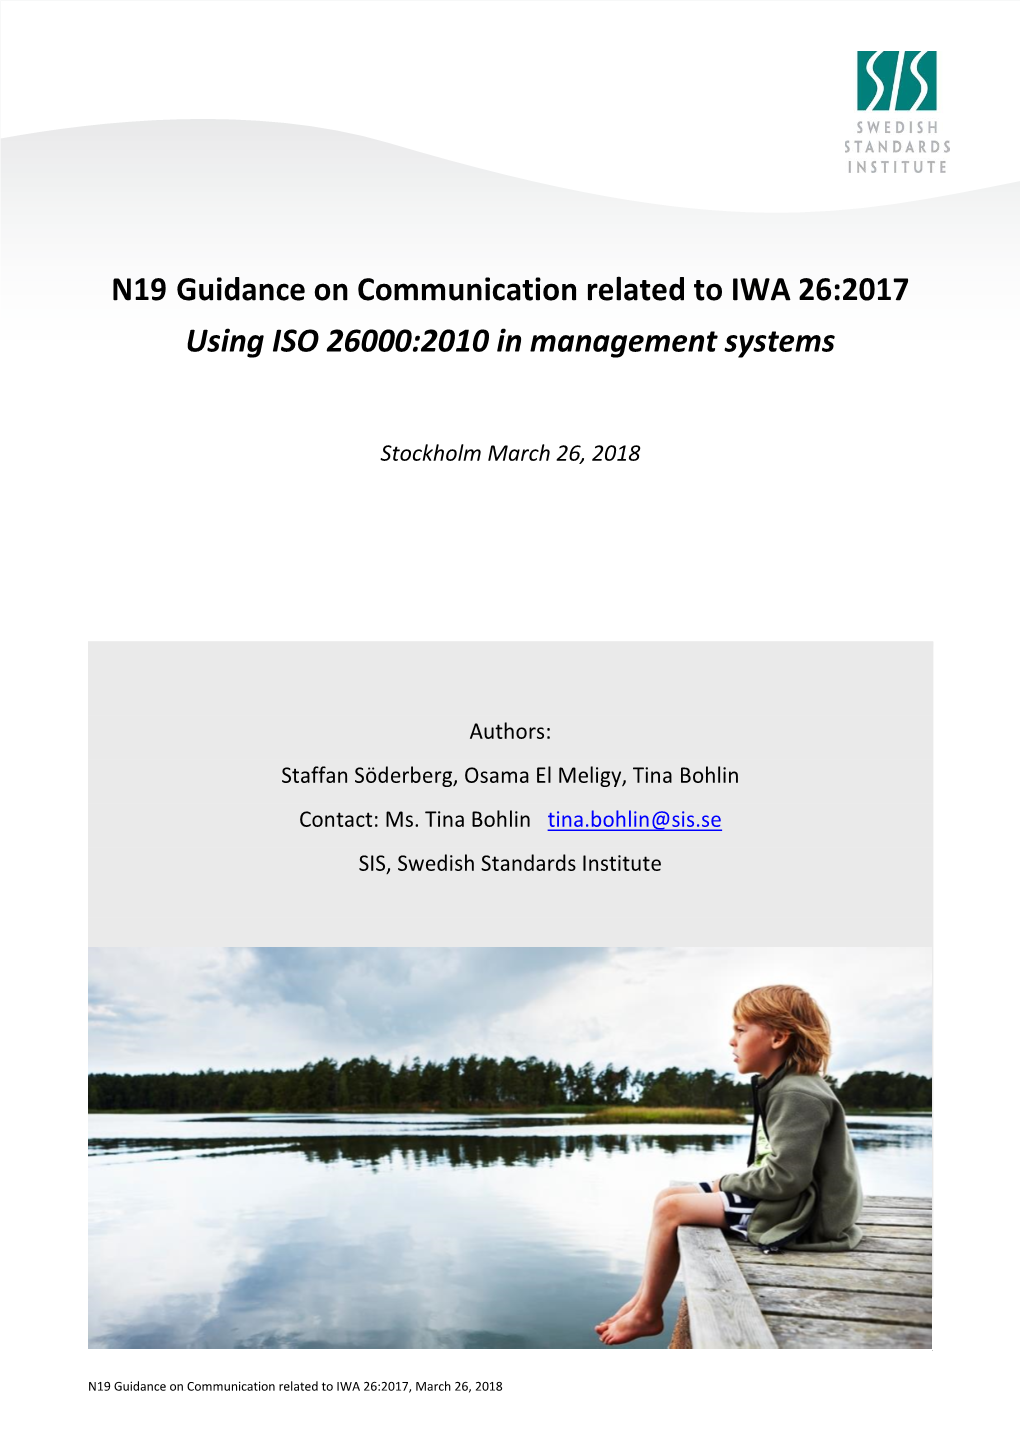 N19 Guidance on Communication Related to IWA 26:2017 Using ISO 26000:2010 in Management Systems